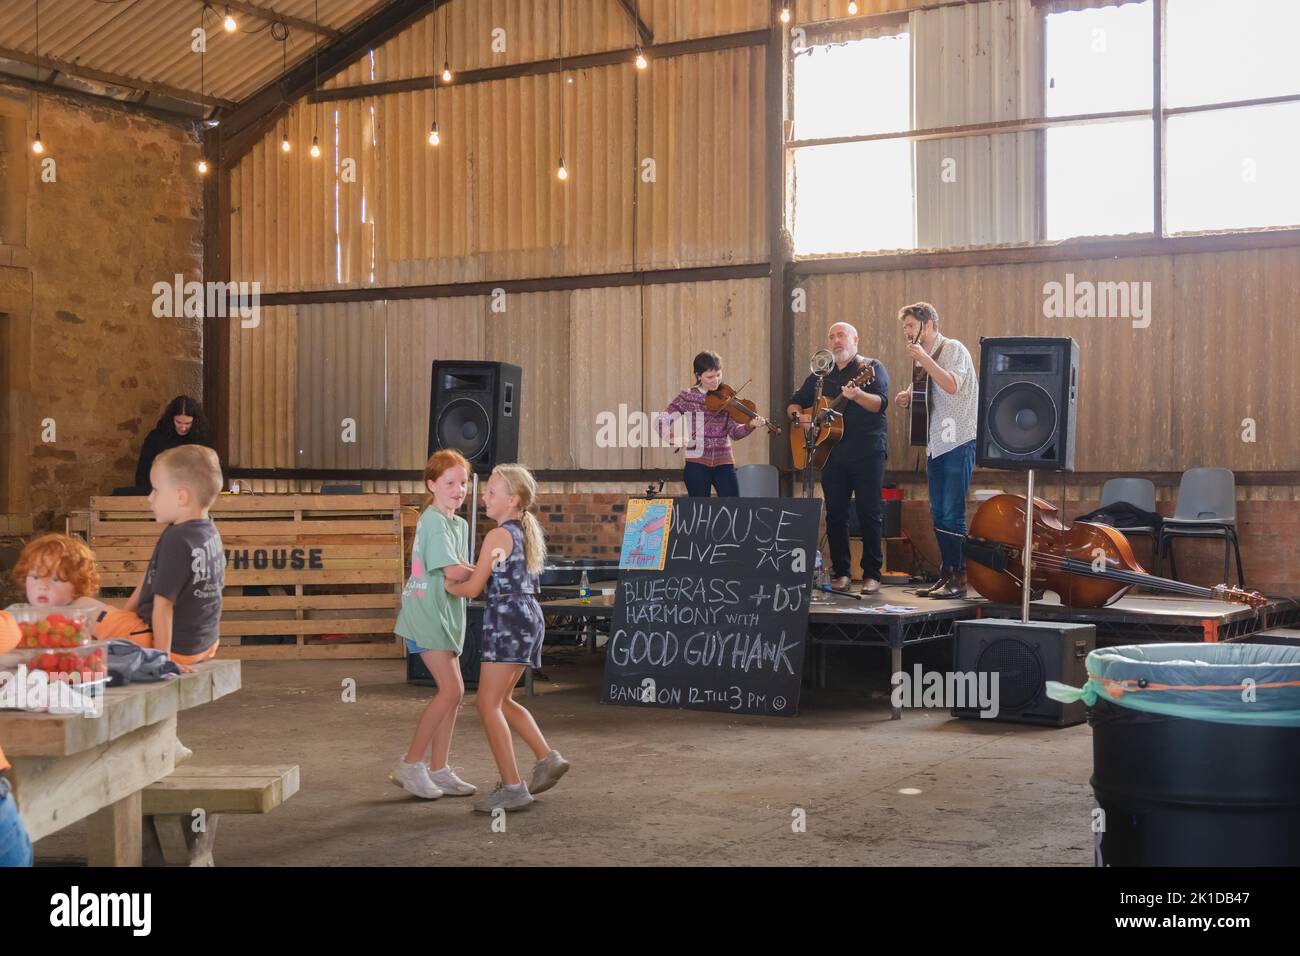 East Neuk, UK - August 14, 2022: Children dance and locals enjoy a live band performing country folk music in a barn at Bowhouse Farmer's Market in Ea Stock Photo